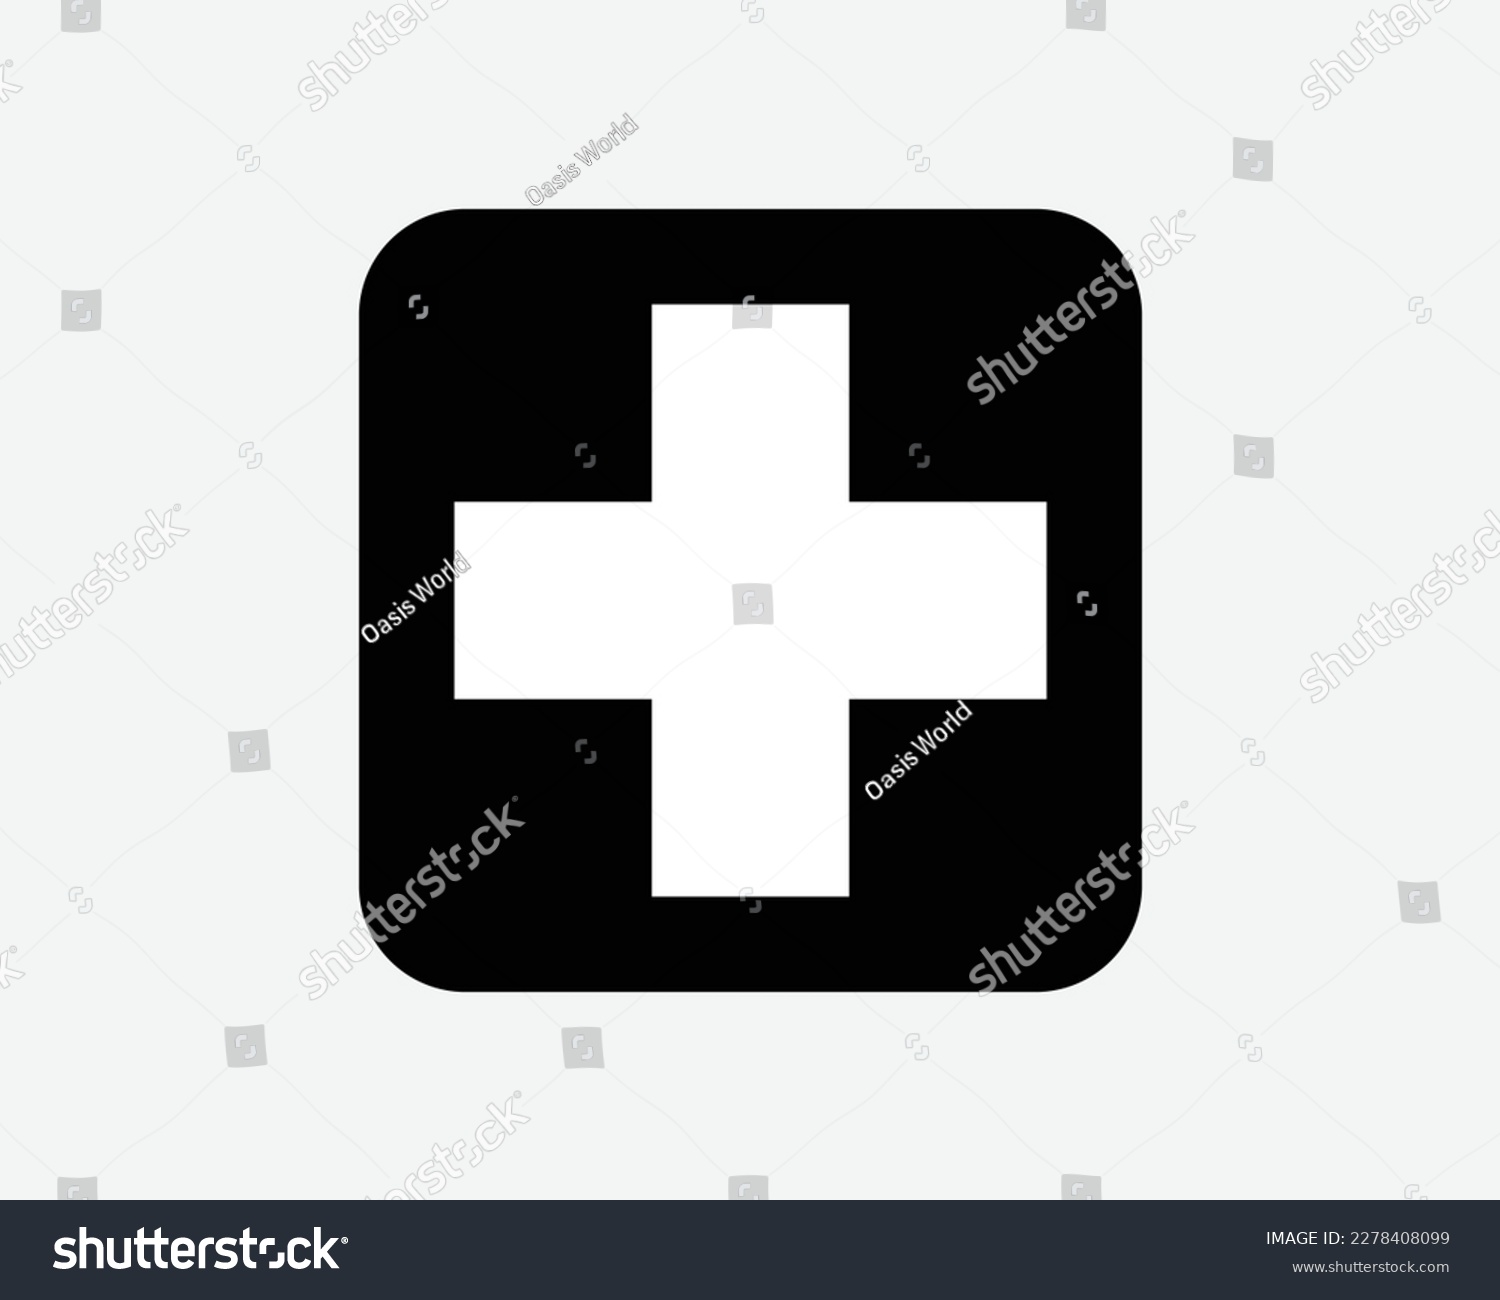 SVG of First Aid Cross Symbol Medical Emergency Humanitarian Care Black White Silhouette Sign Icon Vector Graphic Clipart Illustration Artwork Pictogram svg